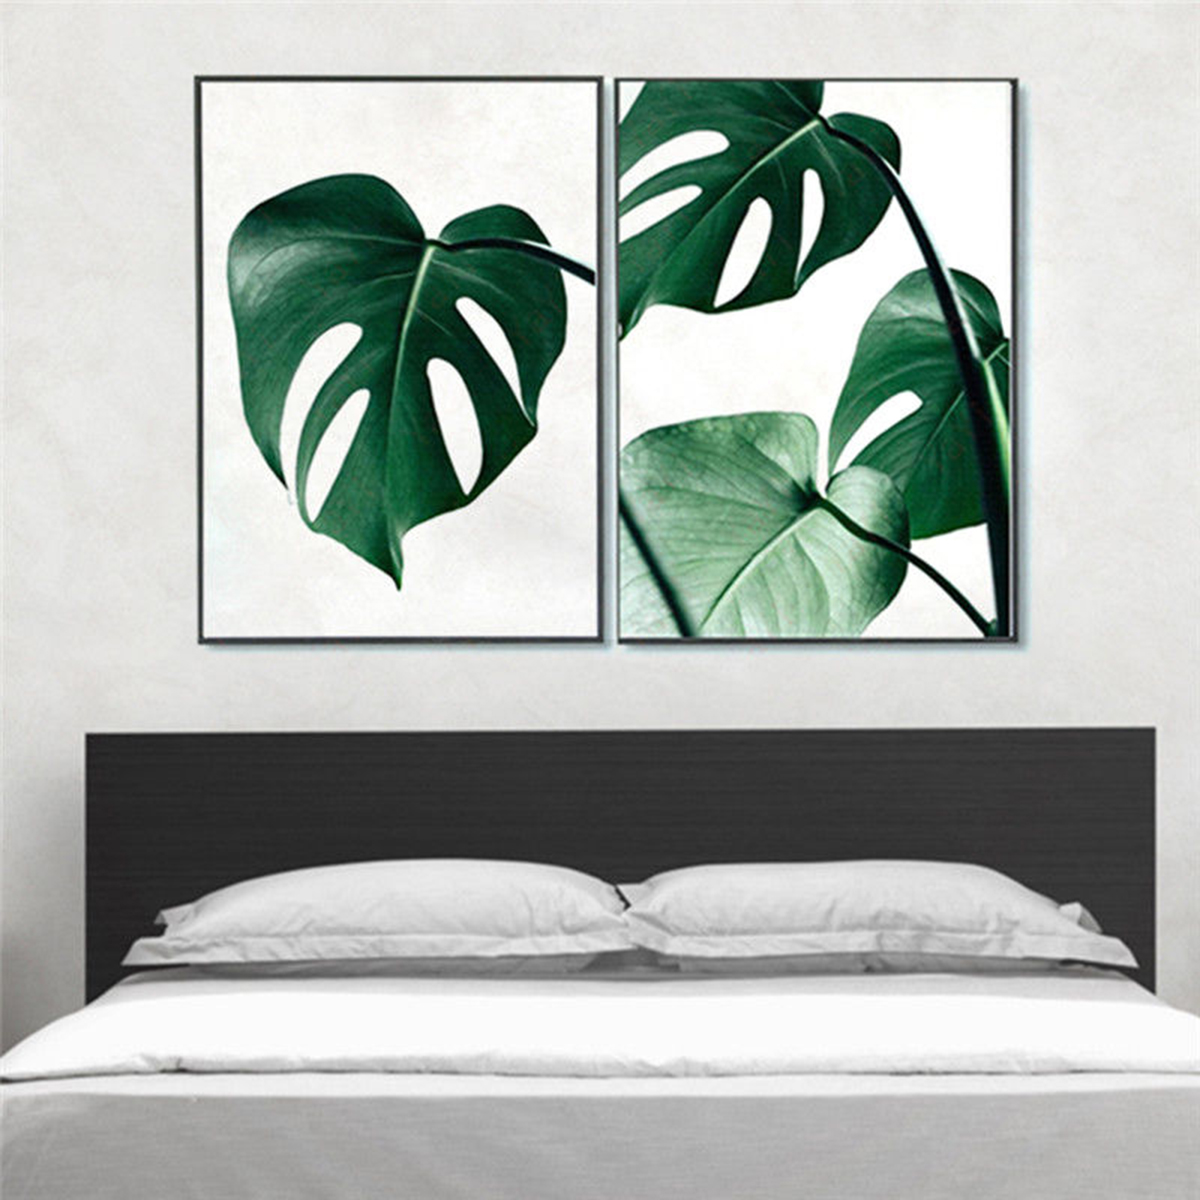 1 Piece Canvas Print Painting Nordic Green Plant Leaf Canvas Art Poster Print Wall Picture Home Decor No Frame—1